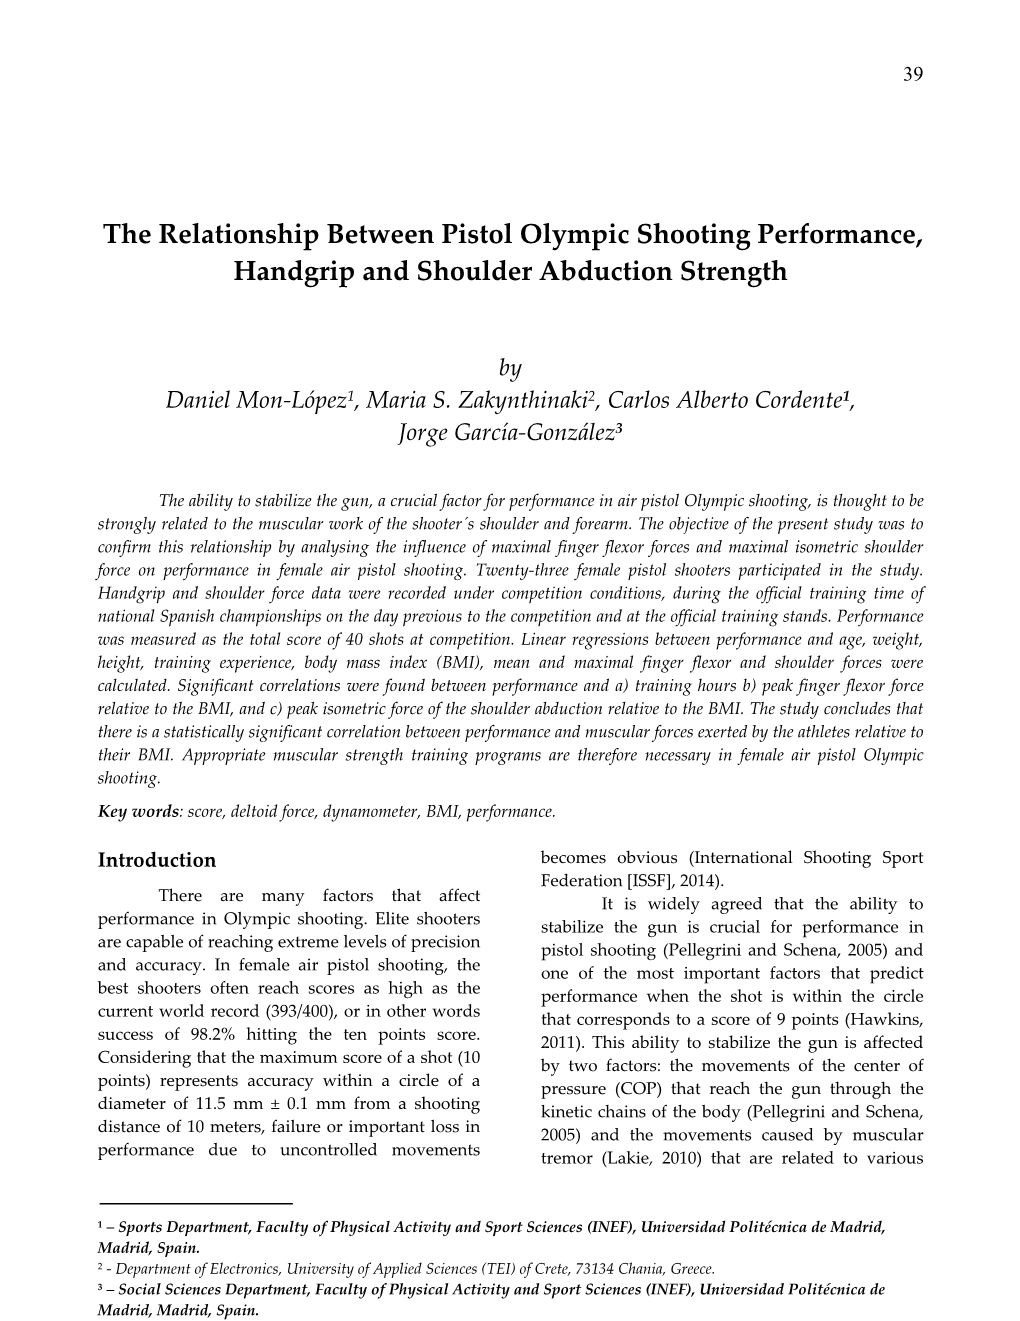 The Relationship Between Pistol Olympic Shooting Performance, Handgrip and Shoulder Abduction Strength